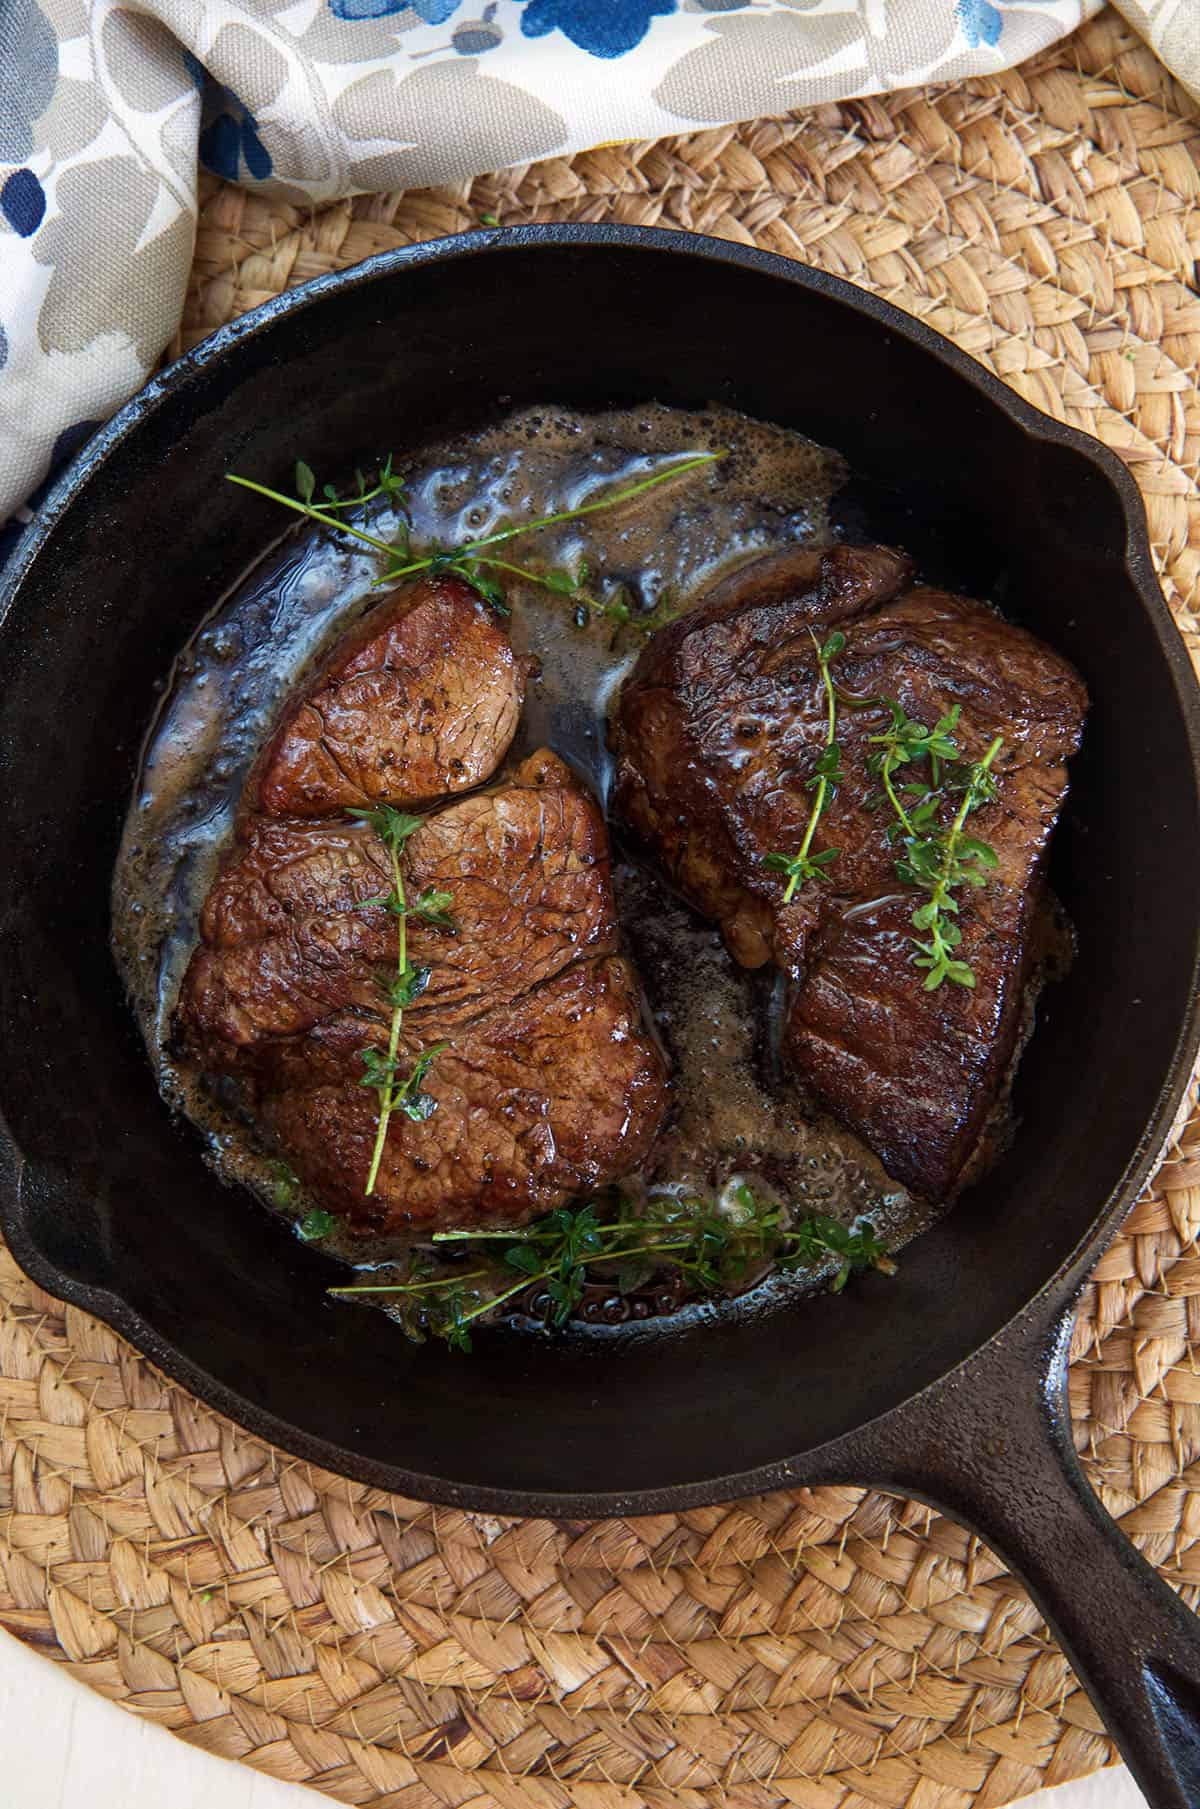 Two cooked steaks are presented with herbs in a black skillet.